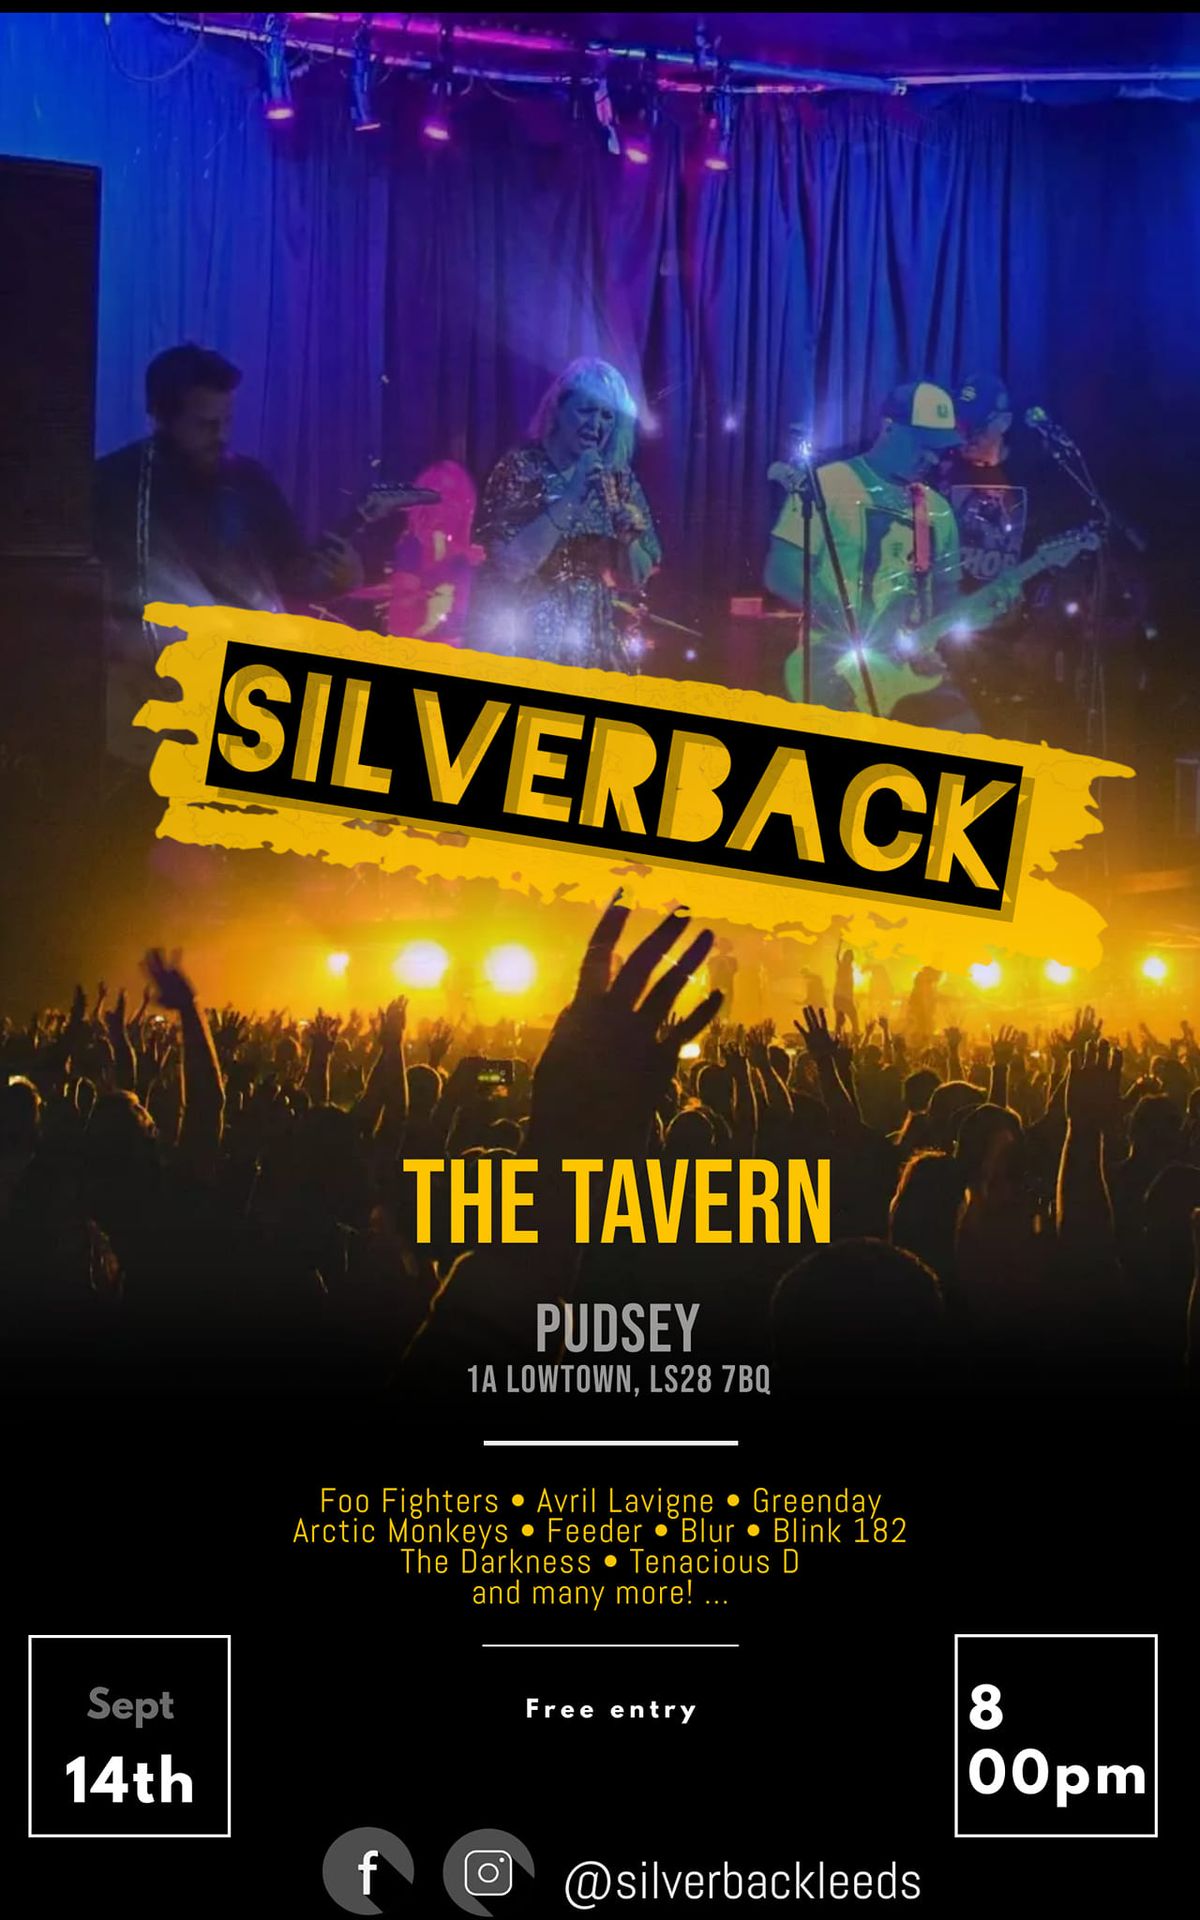 Silverback LIVE @ The Tavern, Pudsey